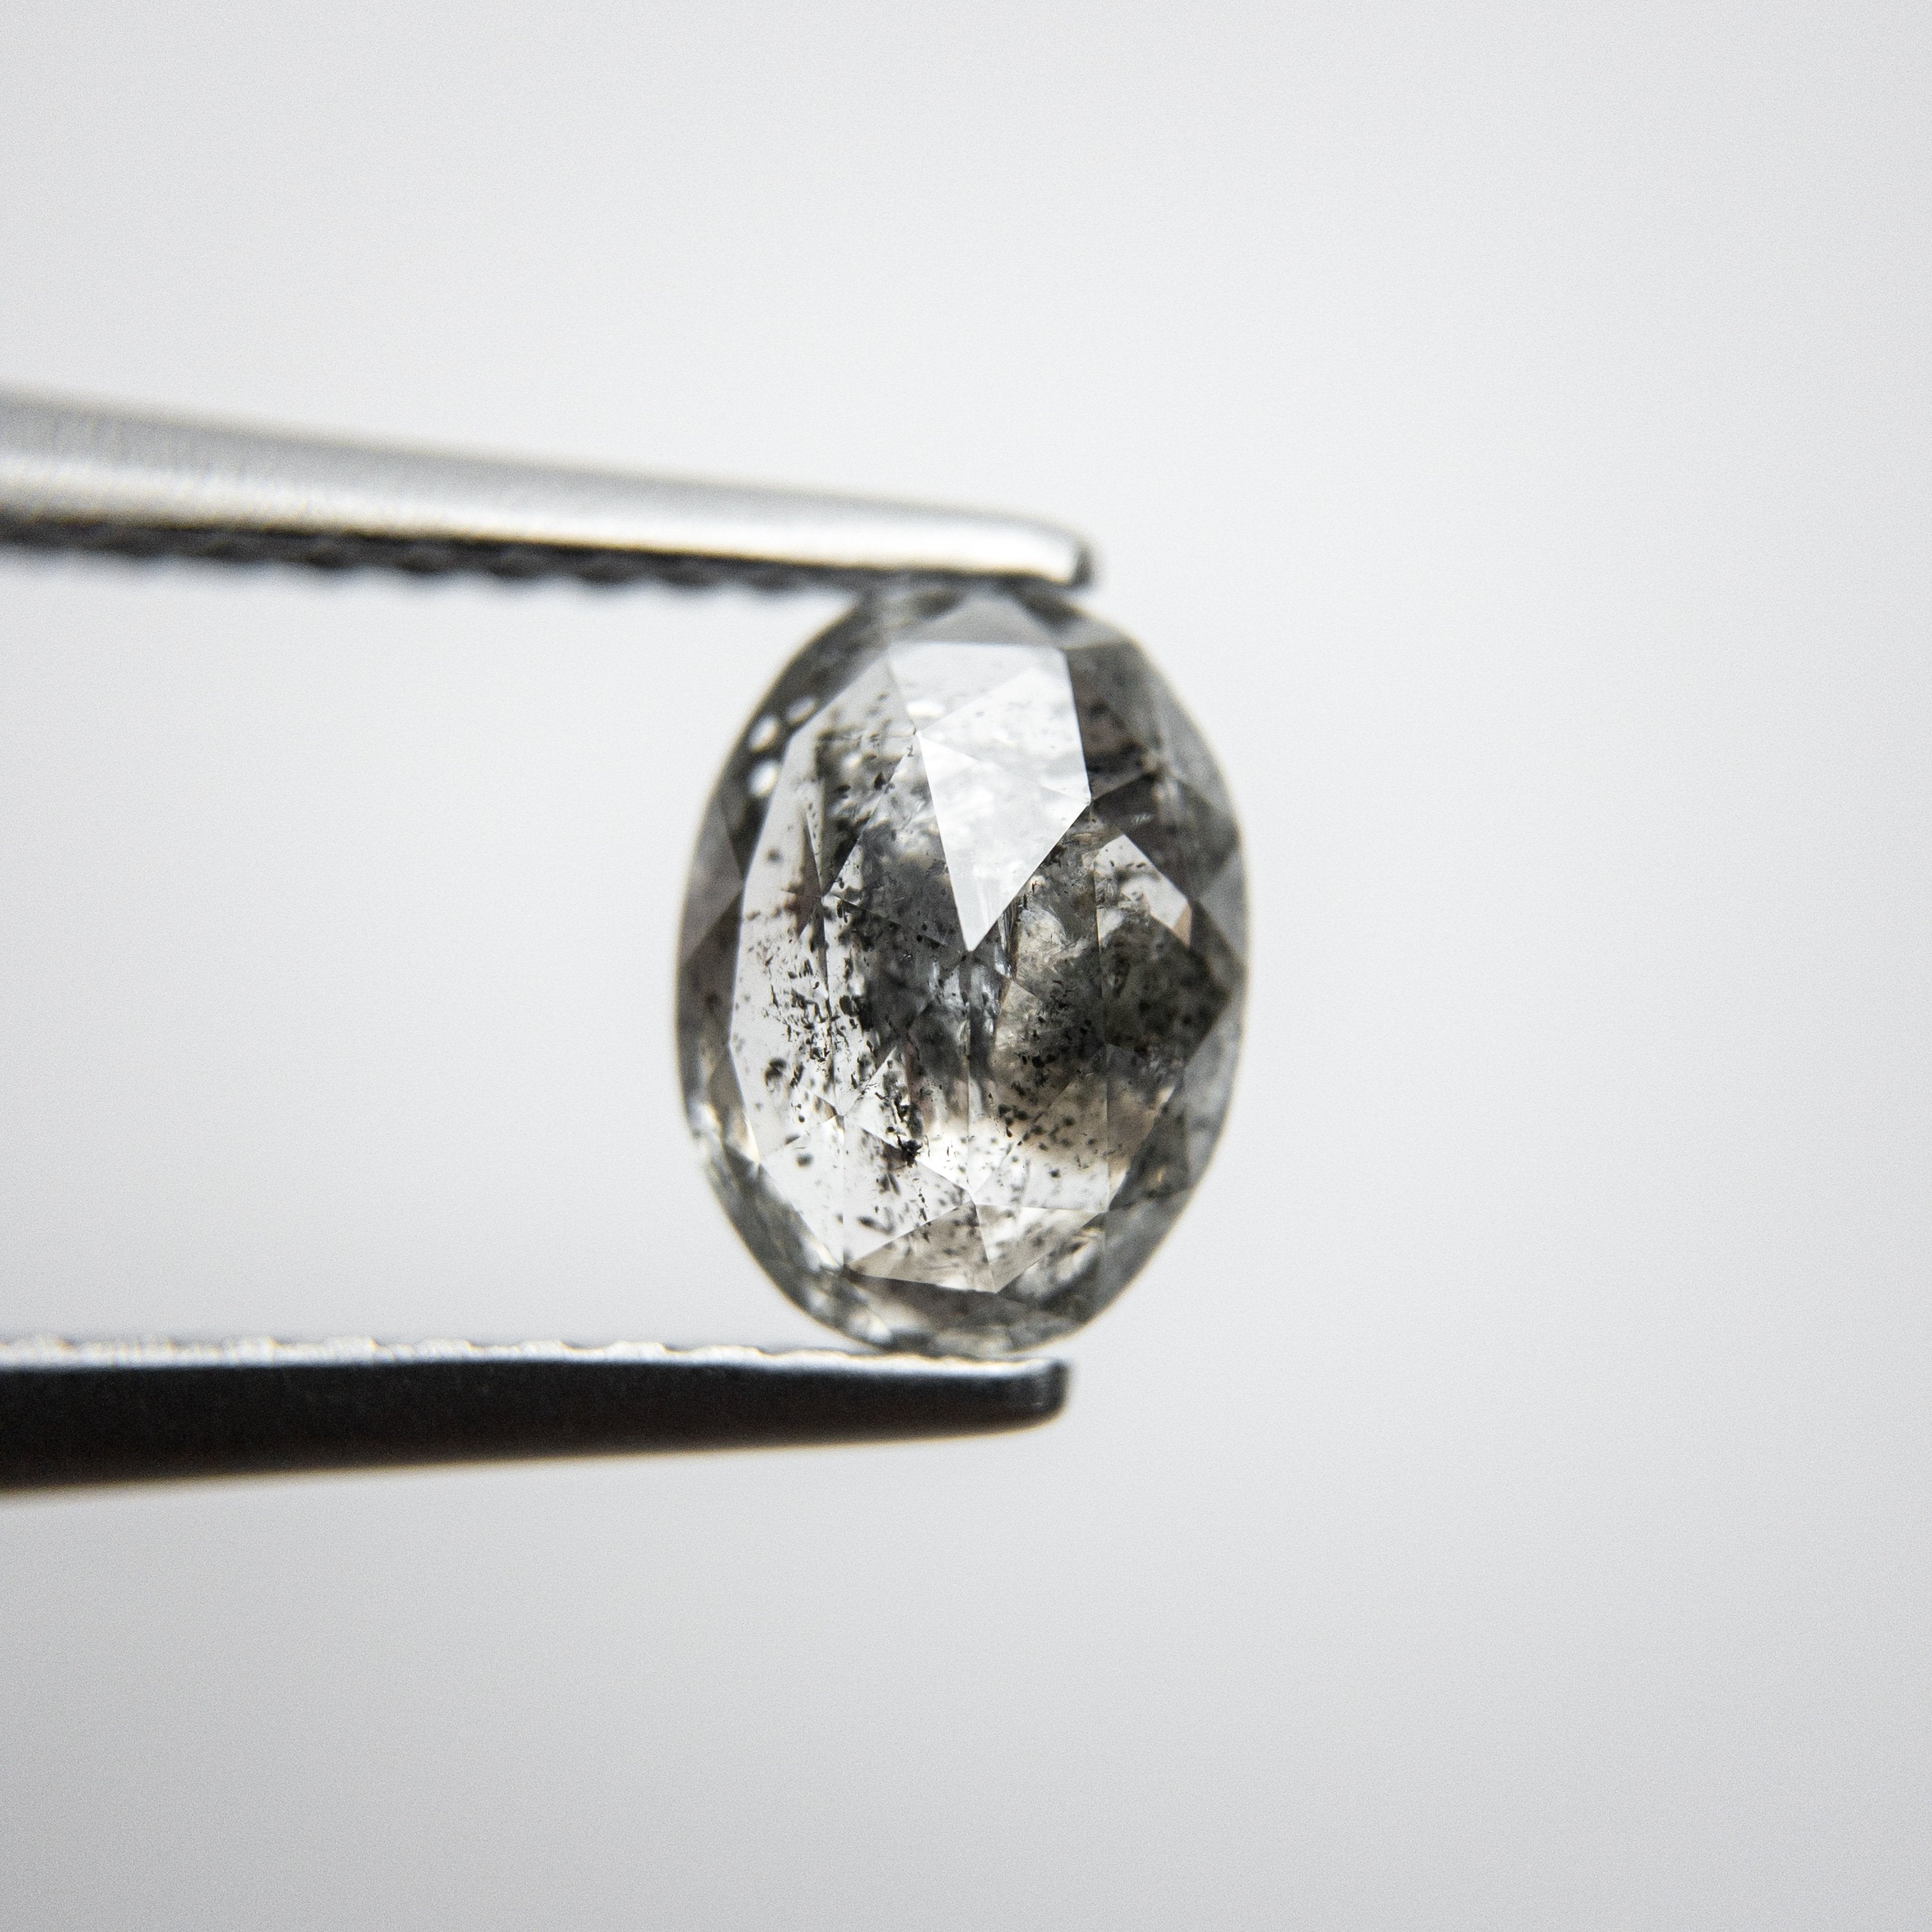 1.13ct 7.61x5.65x2.85mm Oval Double Cut 18219-04